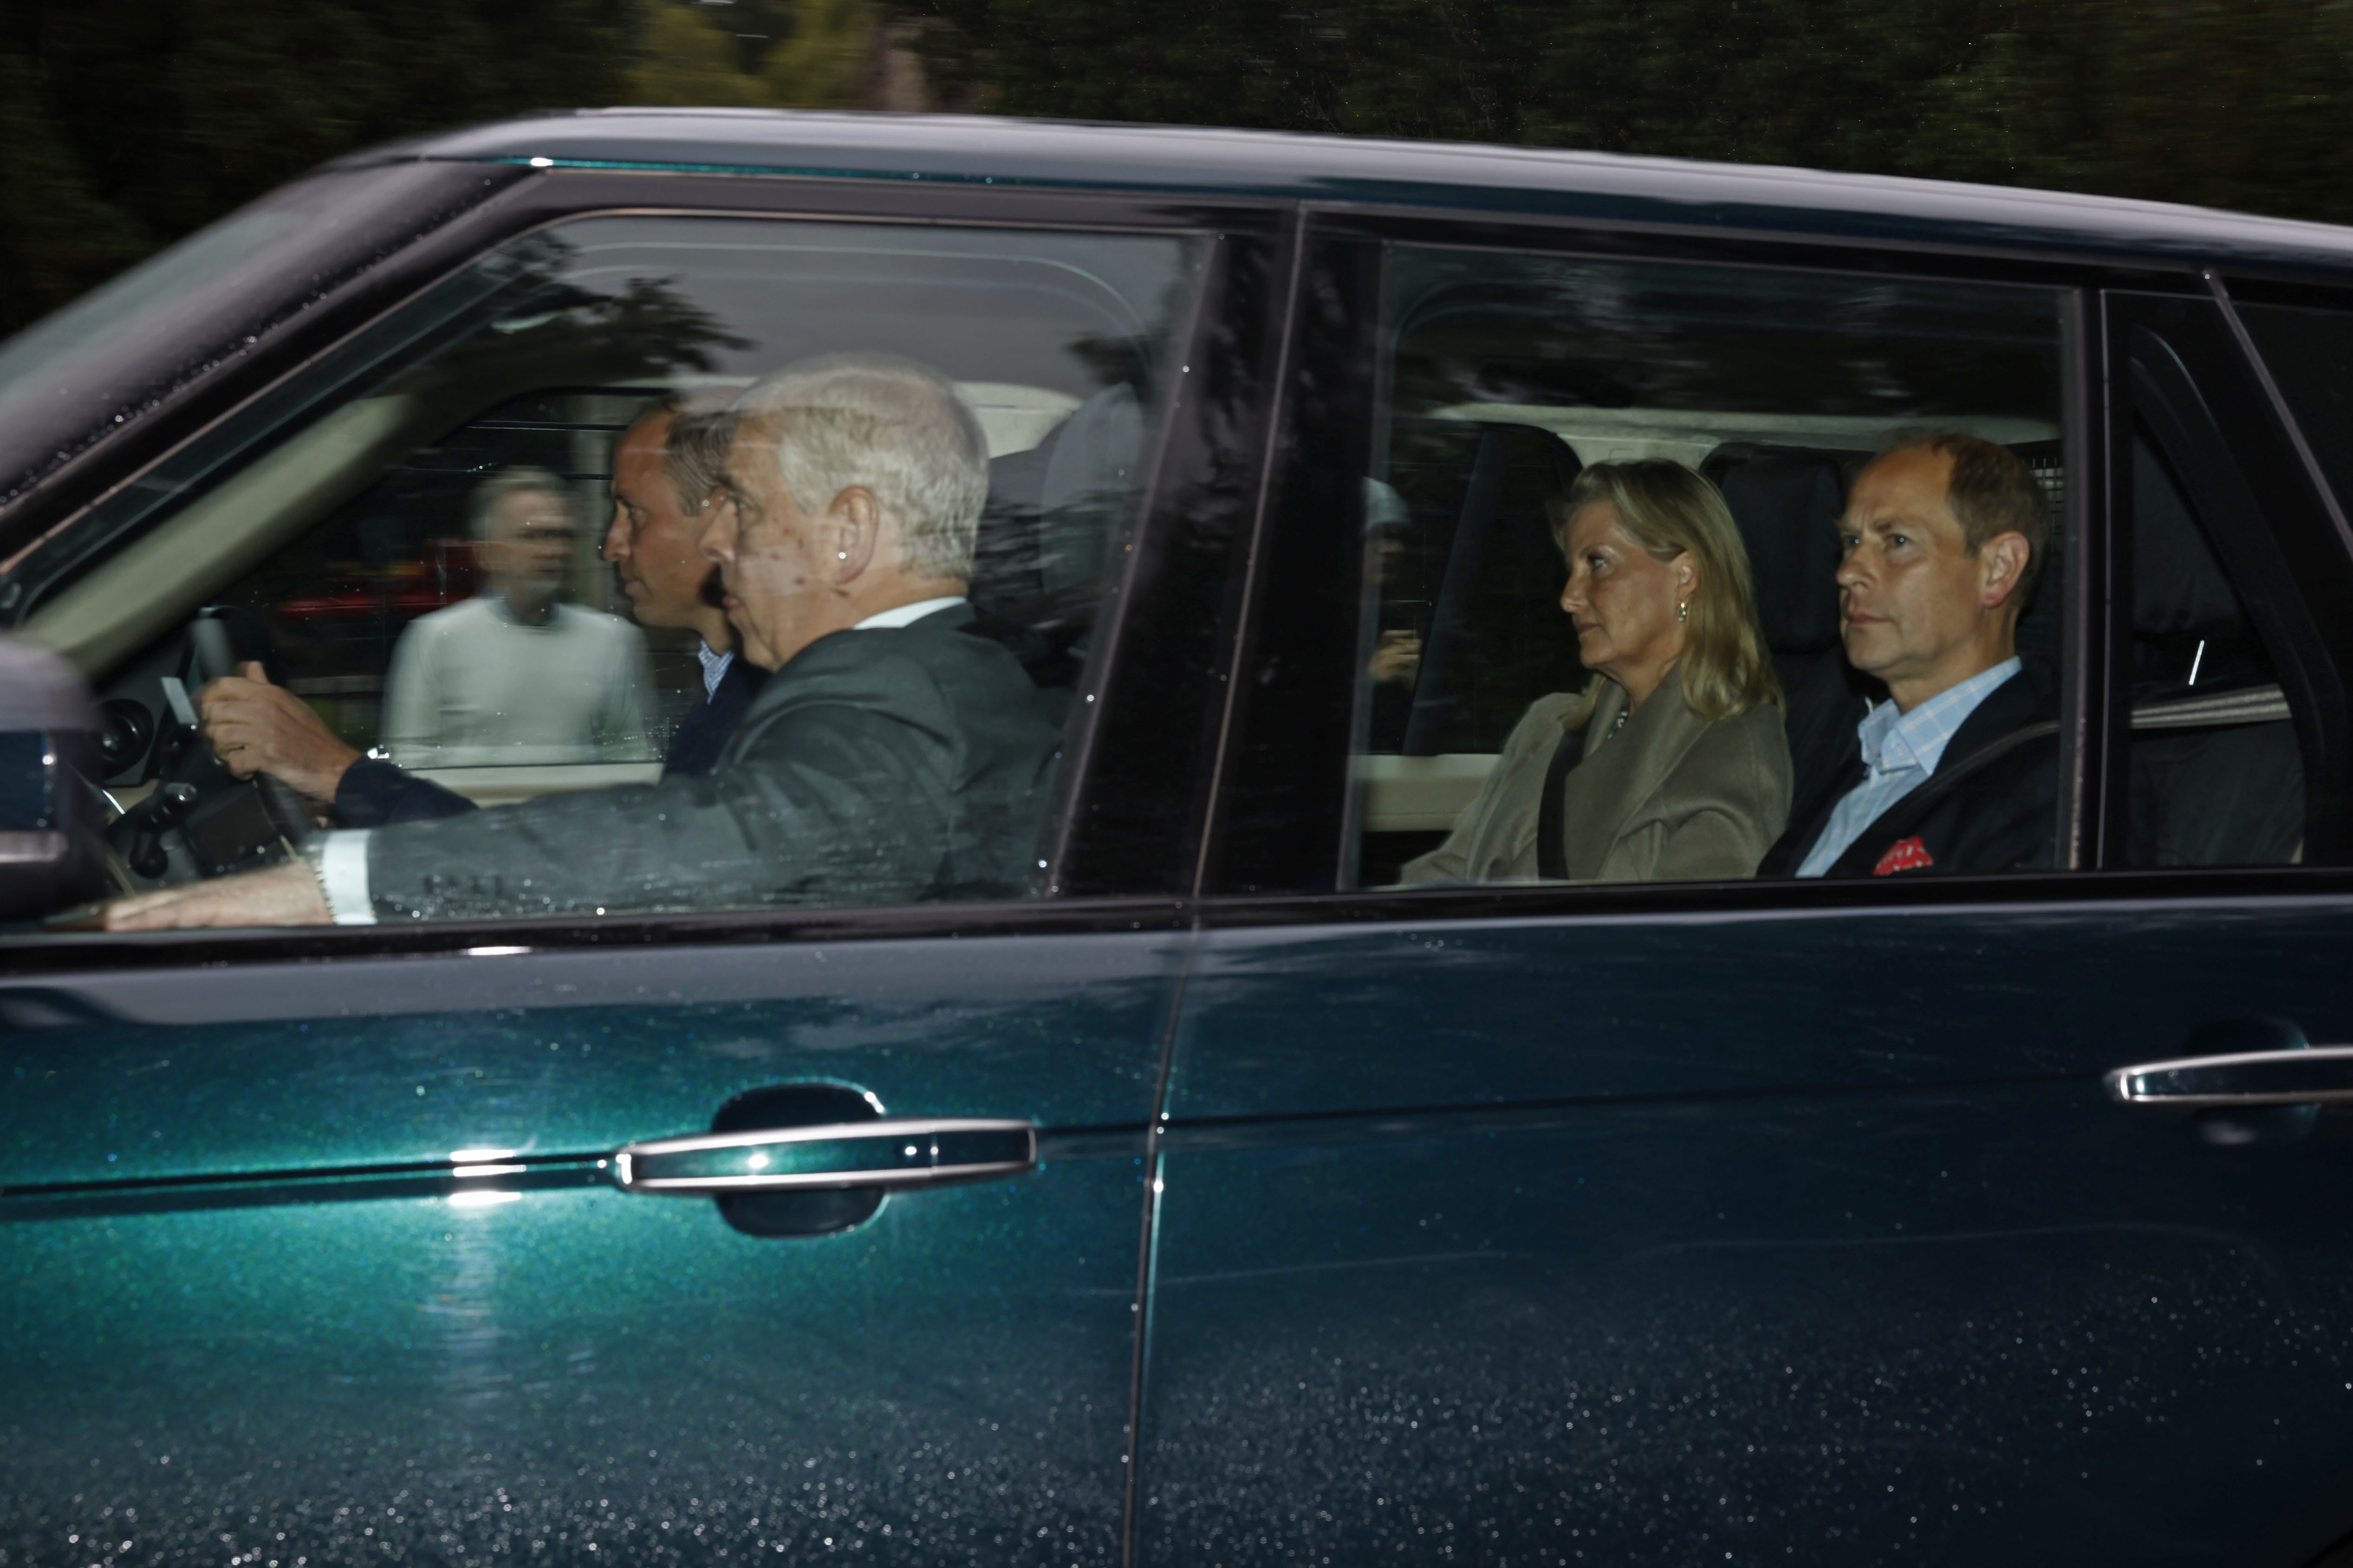 ABERDEEN, SCOTLAND - SEPTEMBER 08: (L-R) Prince William, Duke of Cambridge, Prince Andrew, Duke of York, Sophie, Countess of Wessex and Edward, Earl of Wessex arrive to see Queen Elizabeth at Balmoral Castle on September 8, 2022 in Aberdeen, Scotland. Buc (Foto: Getty Images)